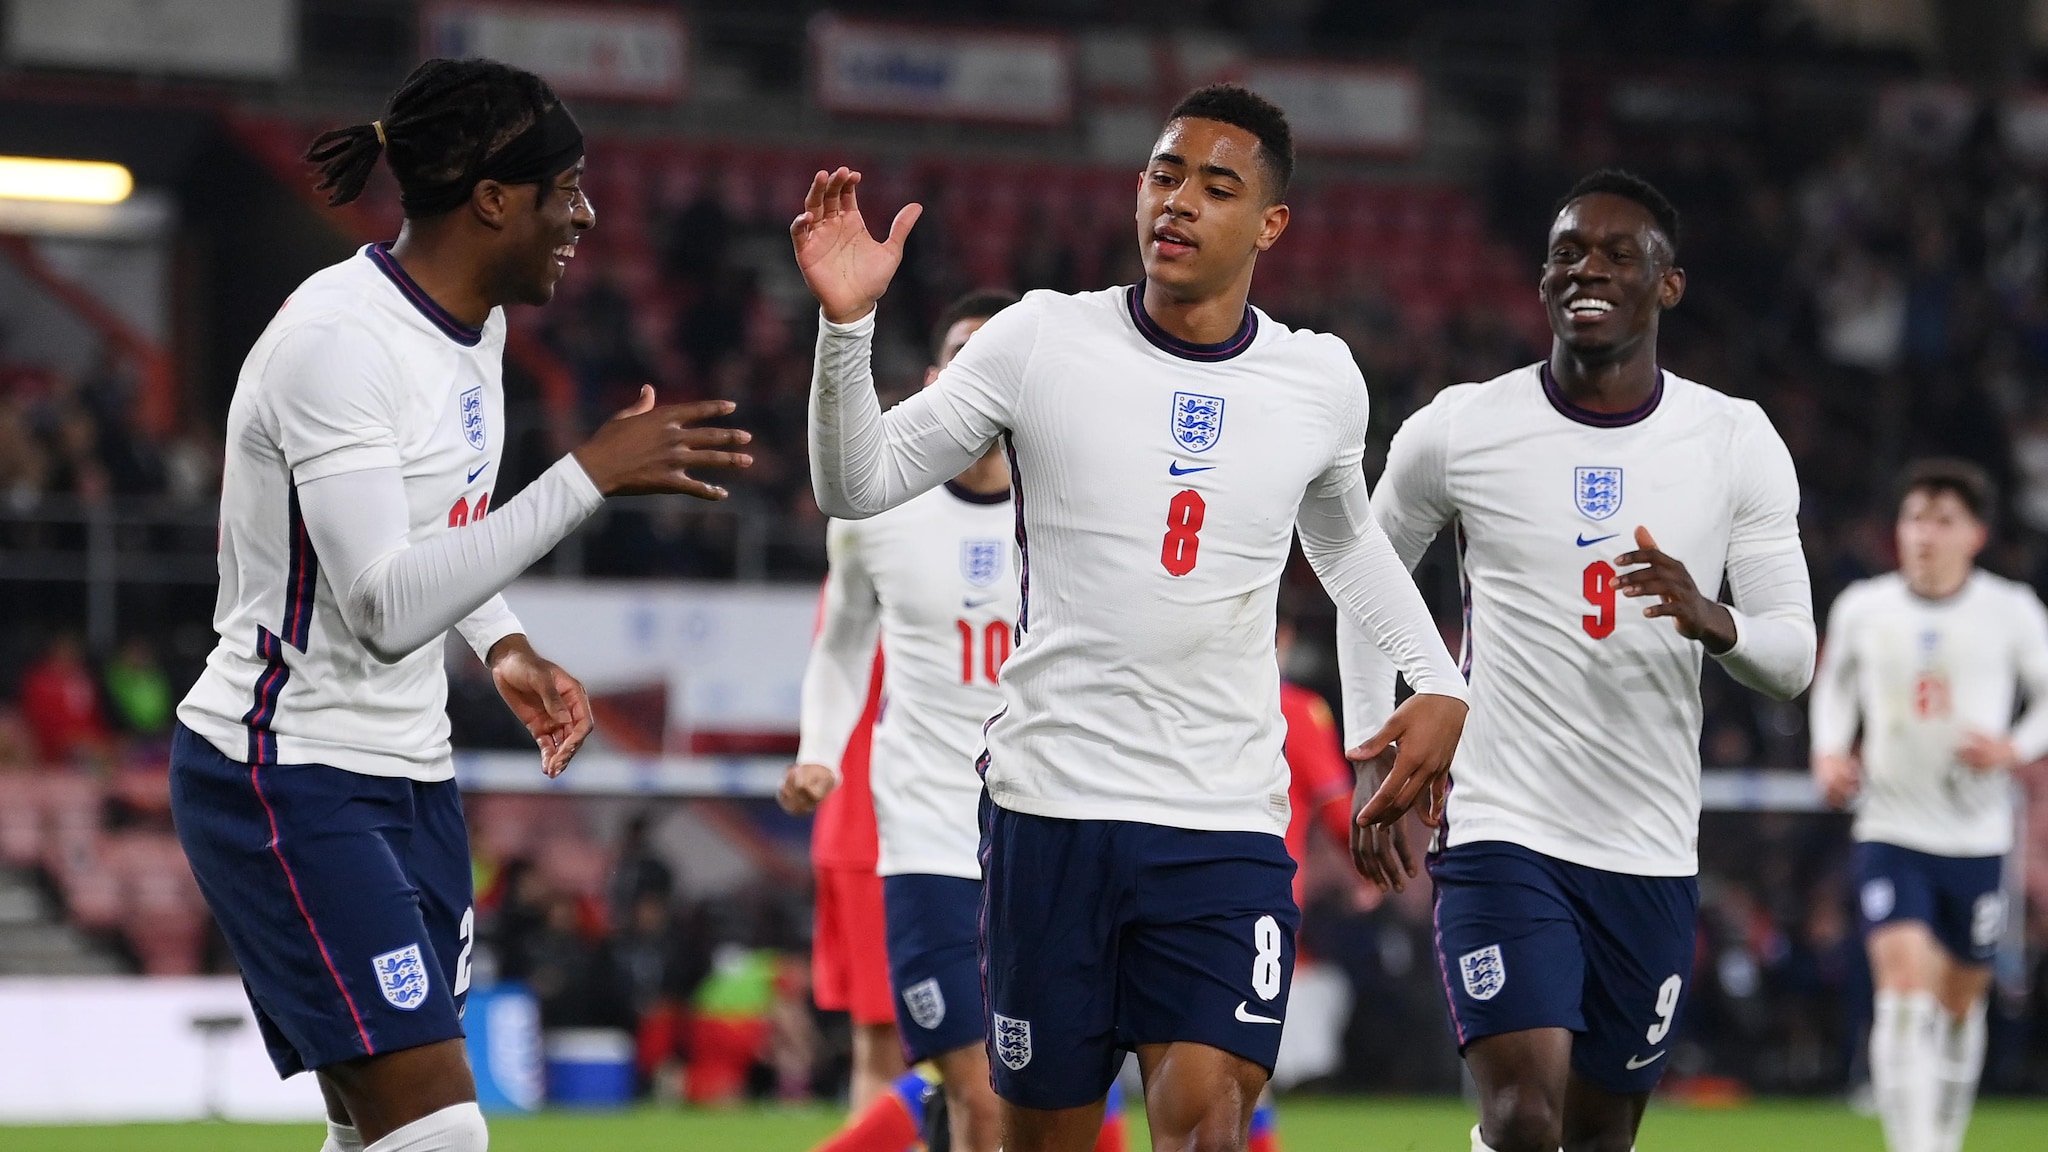 England qualify for the 2023 European Under-21 Championship